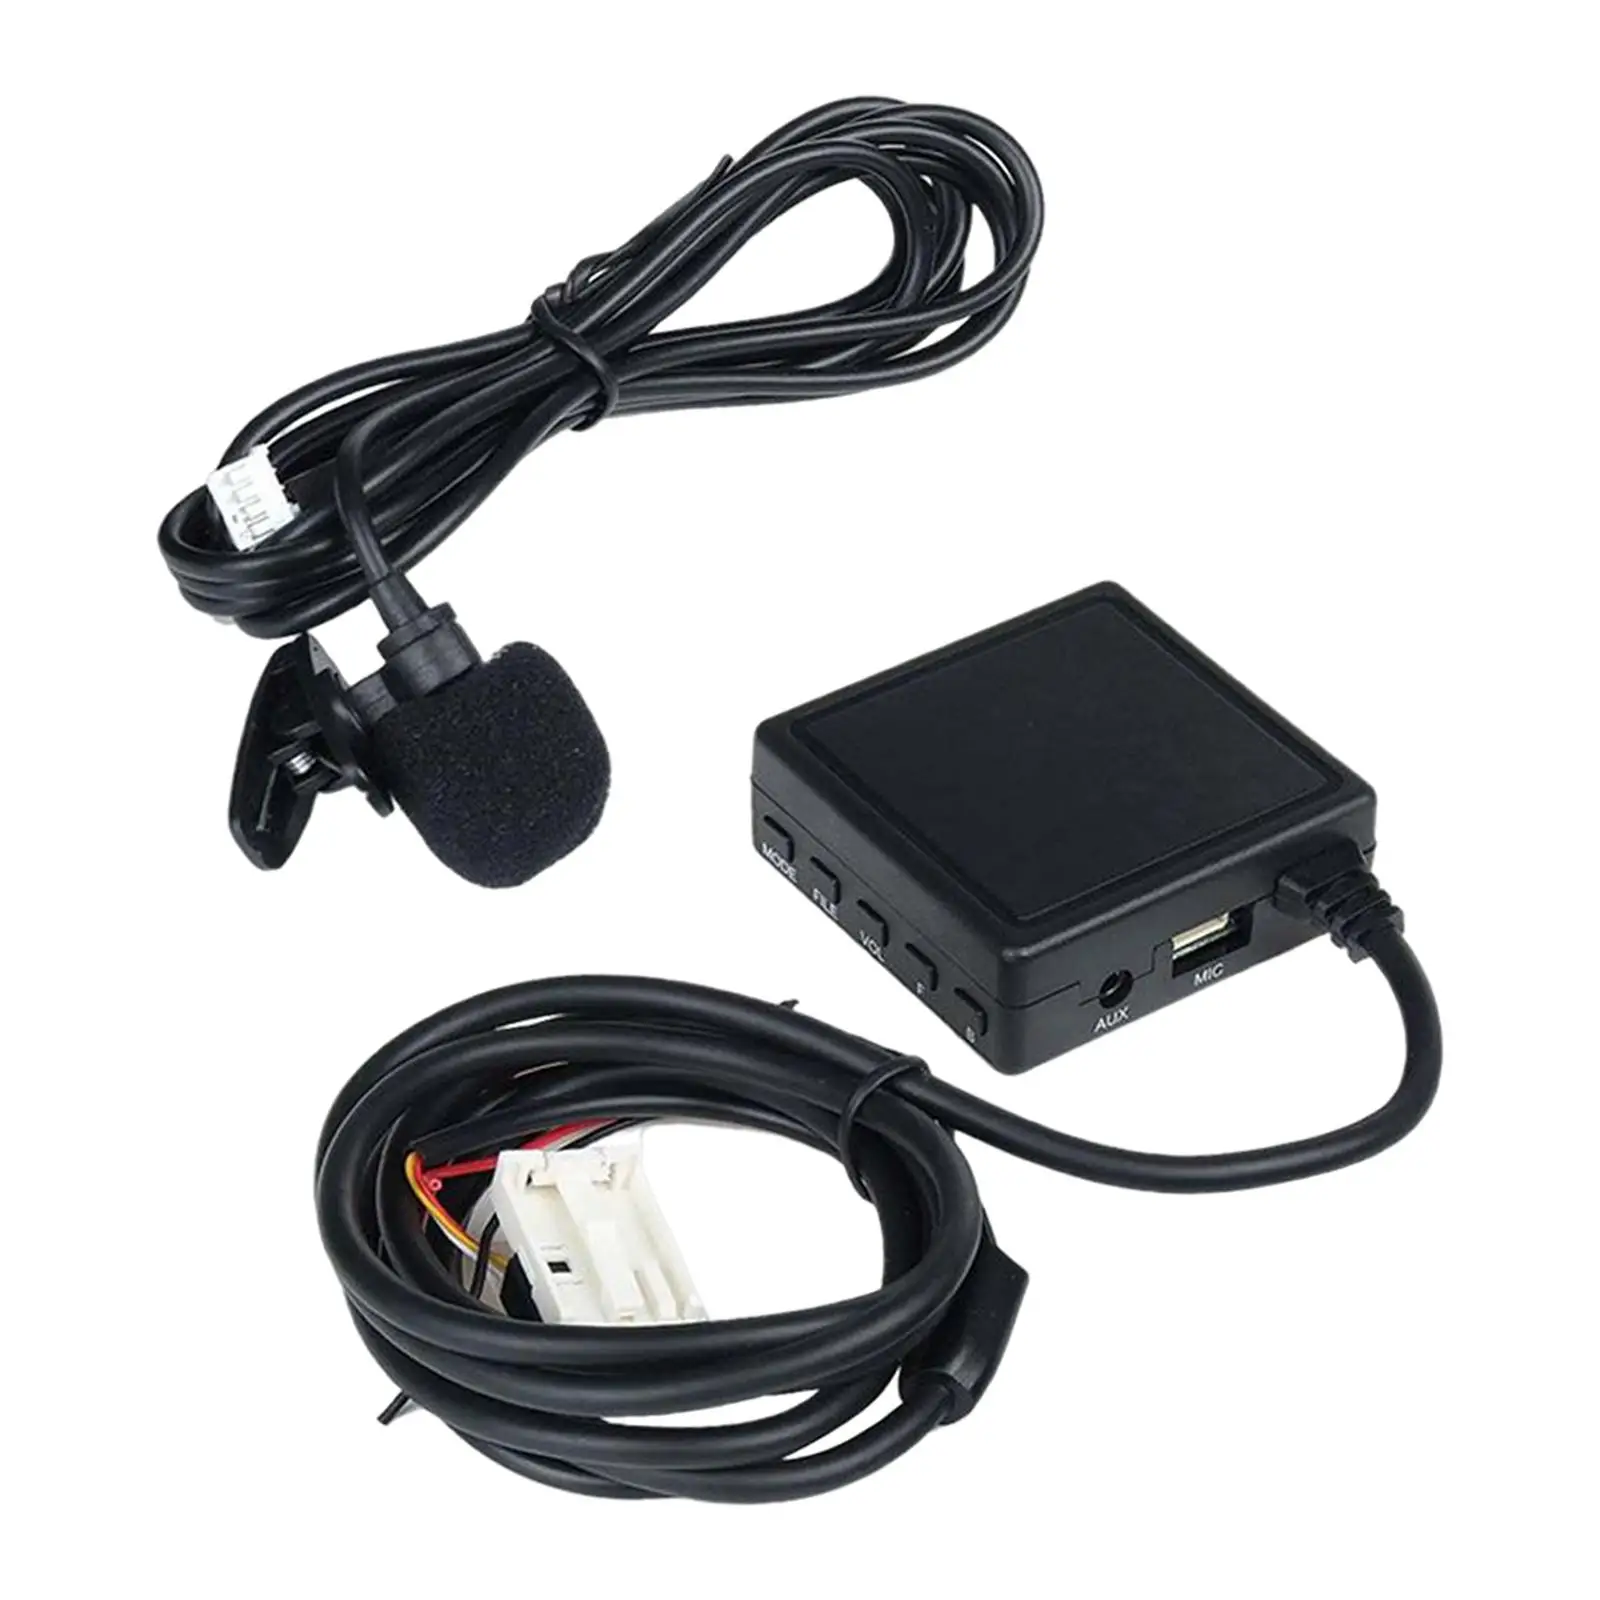 Auxiliary Audio Converter Media Interface Module Plug and play AUX Cable Adapter for E91